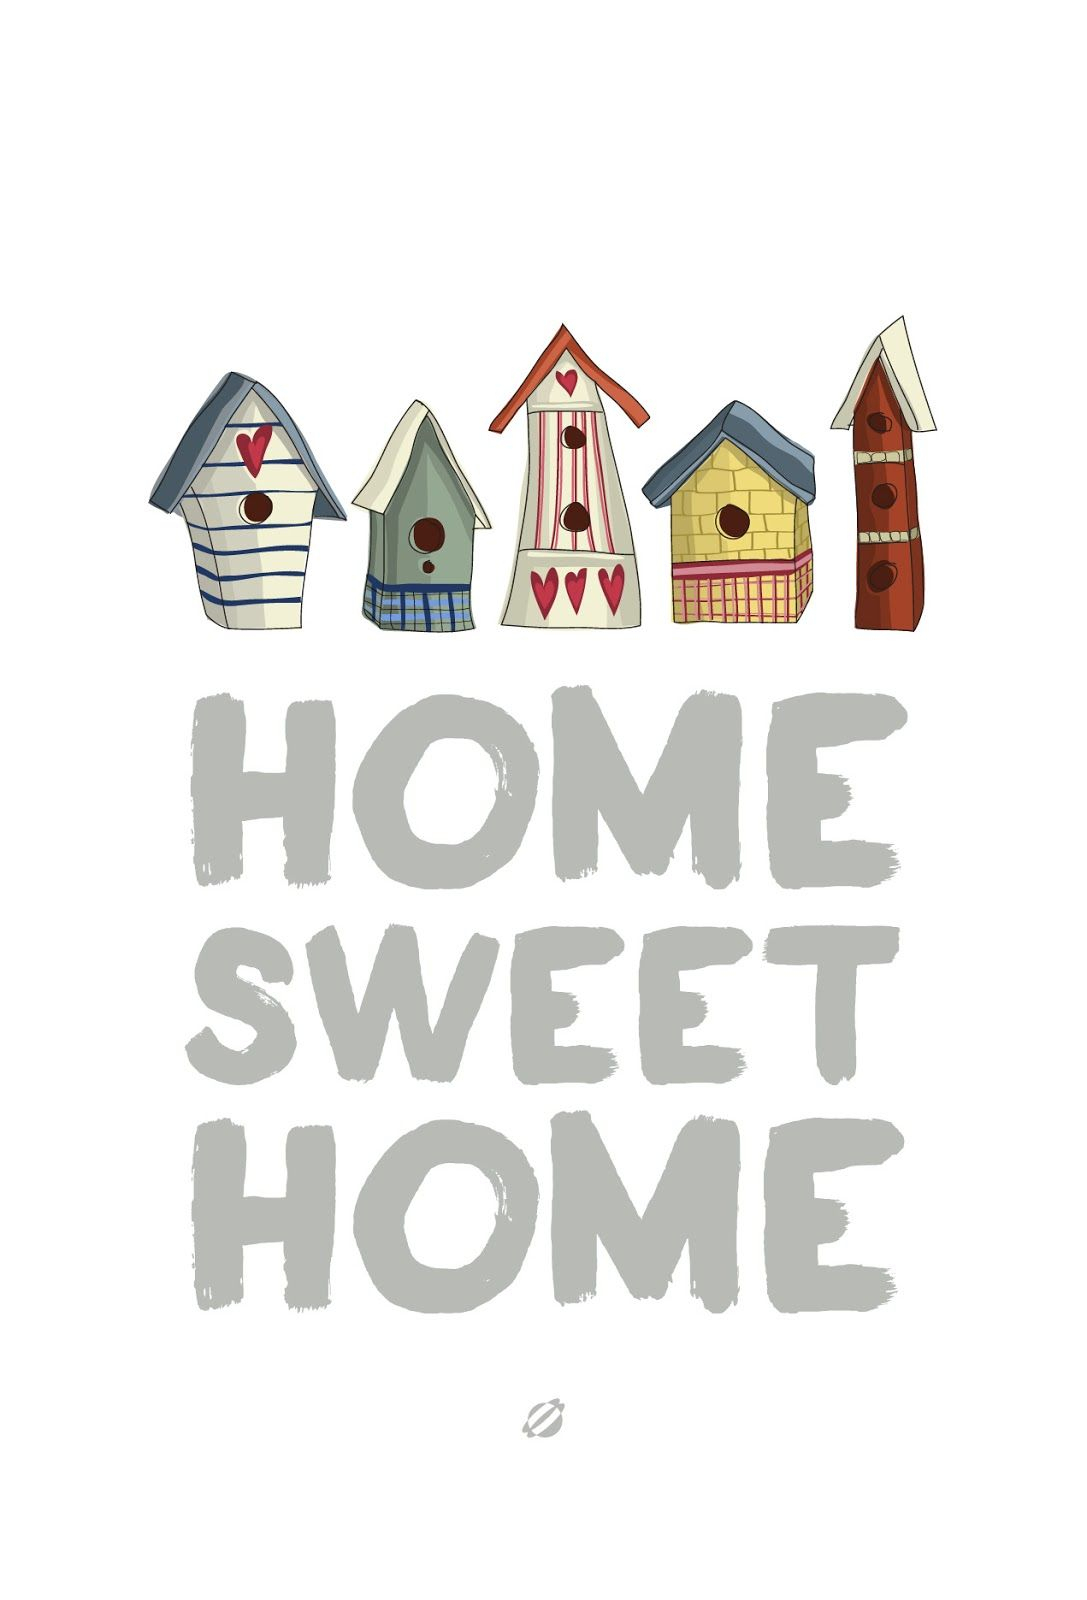 Free Quote Printable: Home Sweet Home / Lostbumblebee | Home Sweet - Home Sweet Home Free Printable